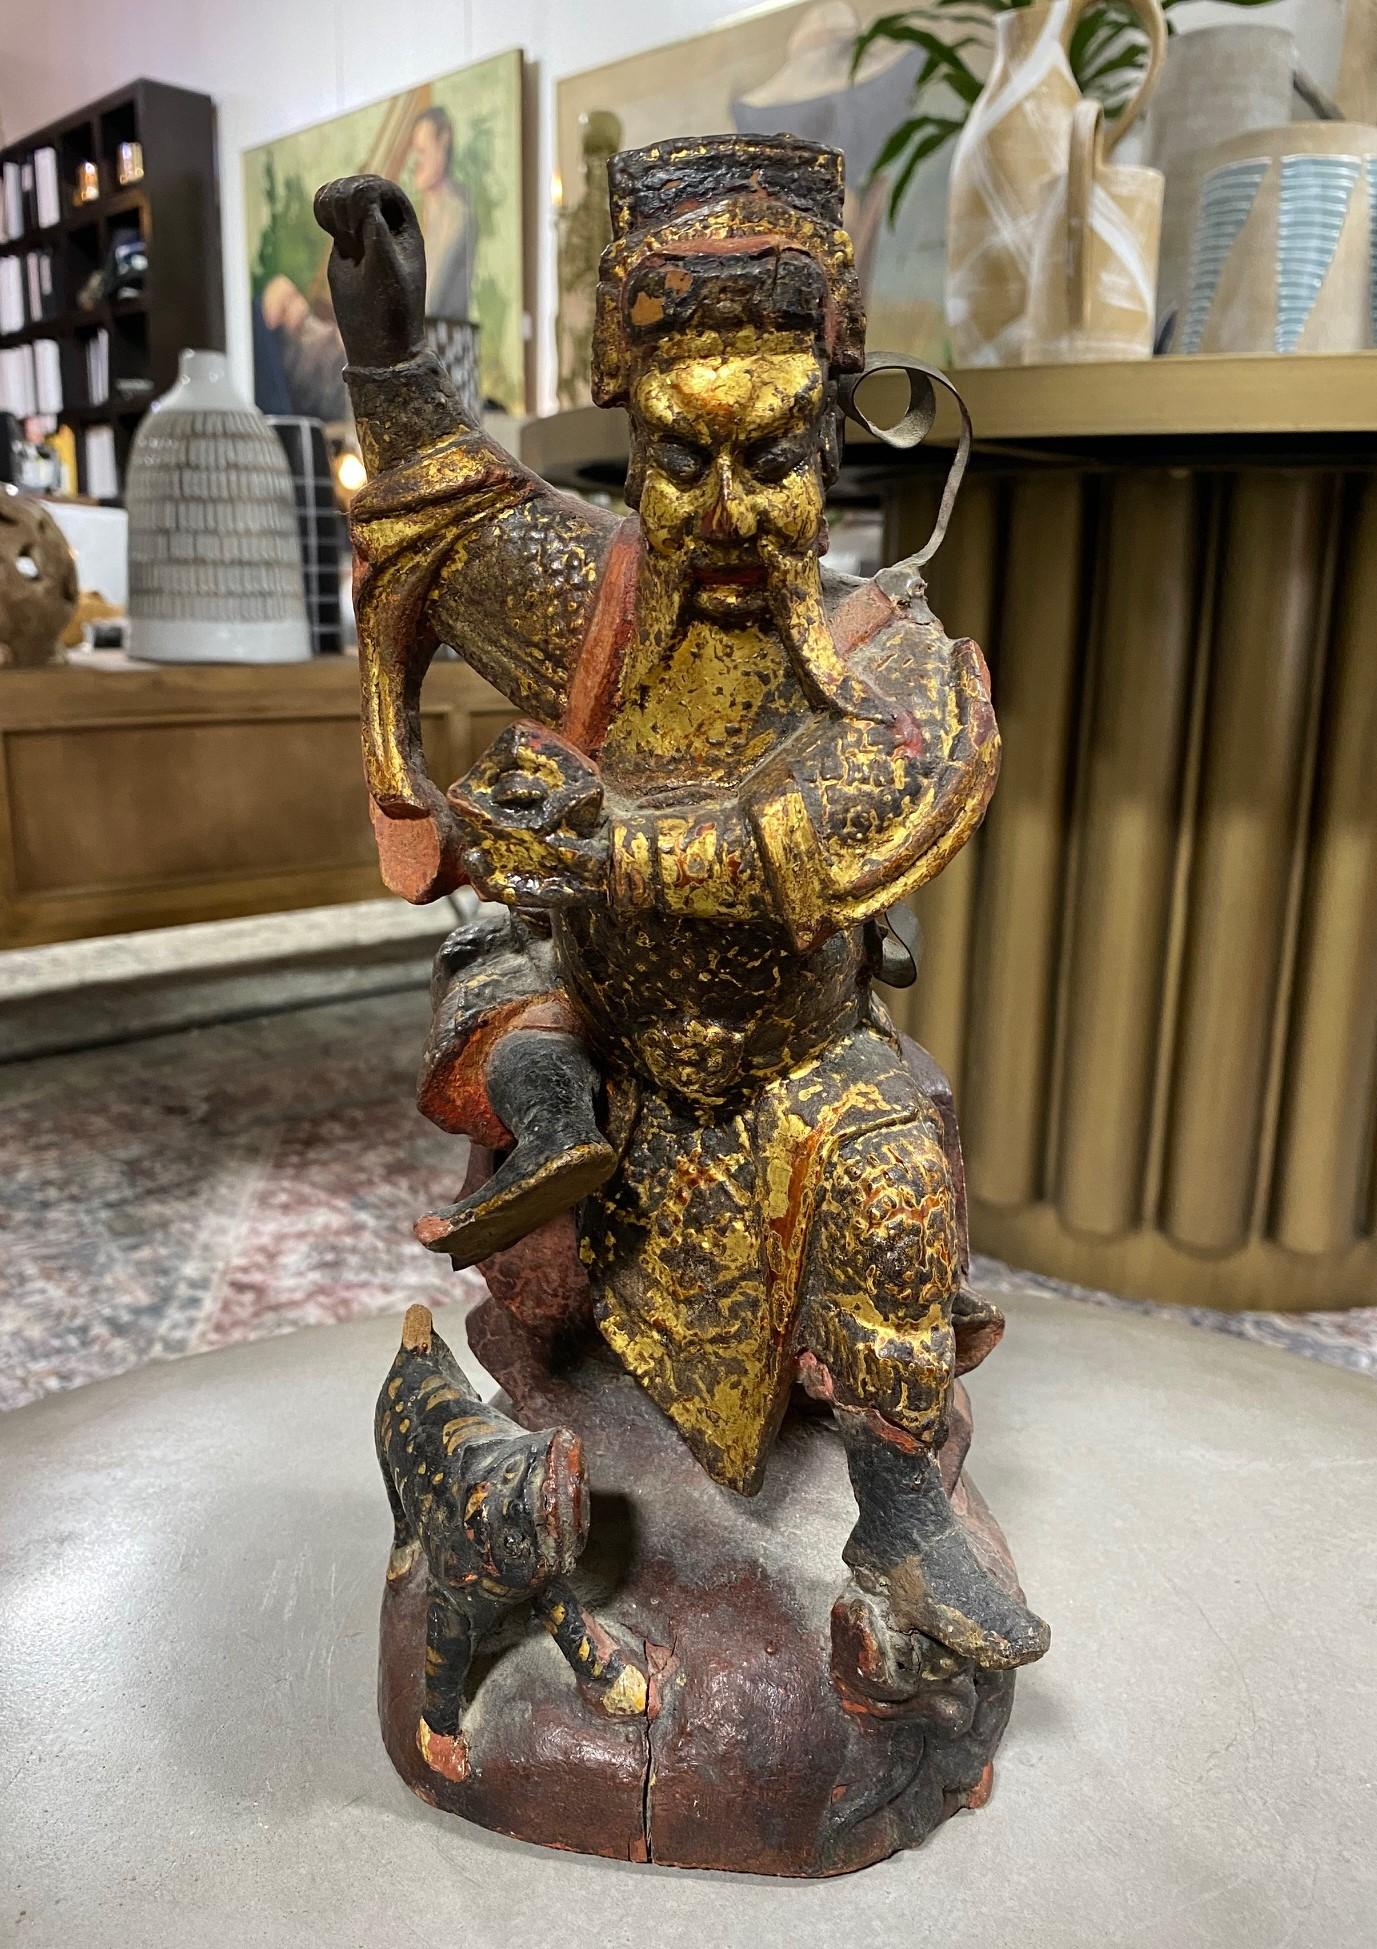 A fantastic wood and gilt decorated hand carved Chinese ancestral temple shrine Emperor figure with a tiger.

From a collection of Chinese and Asian artifacts. 

We are listing it as 19th century but could be earlier. 

Dimensions: 12